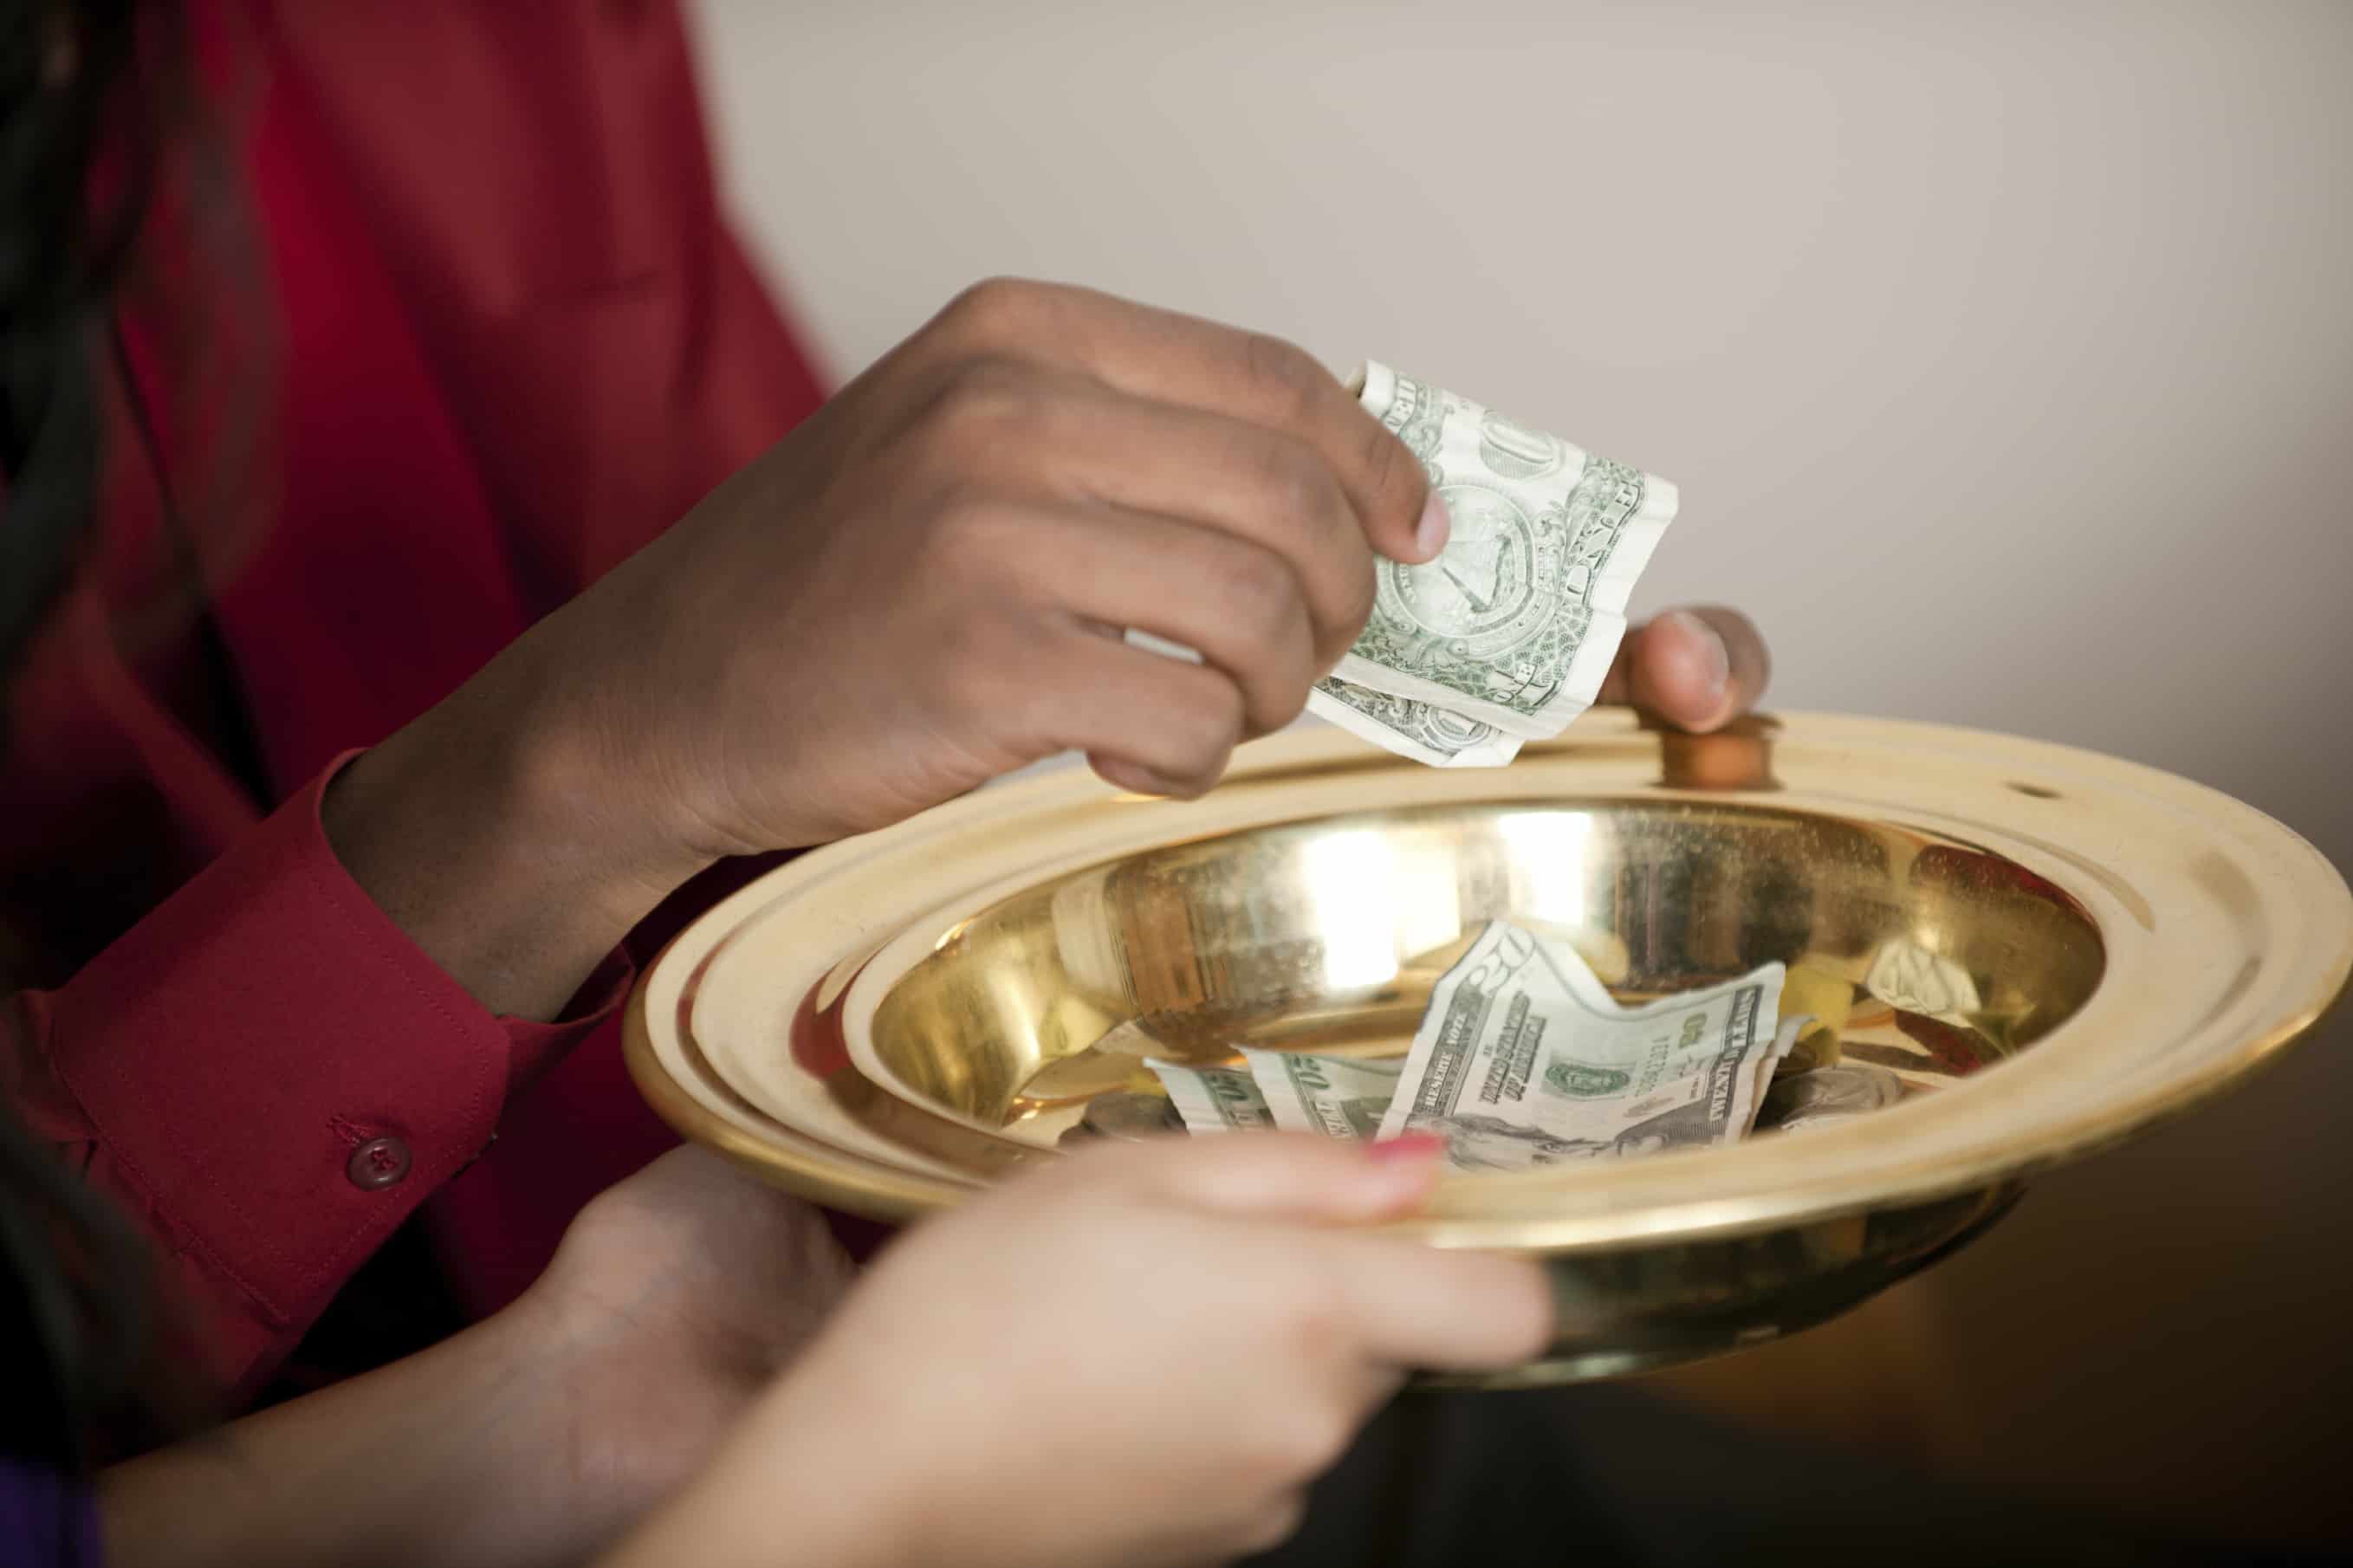 person dropping money in a collection plate